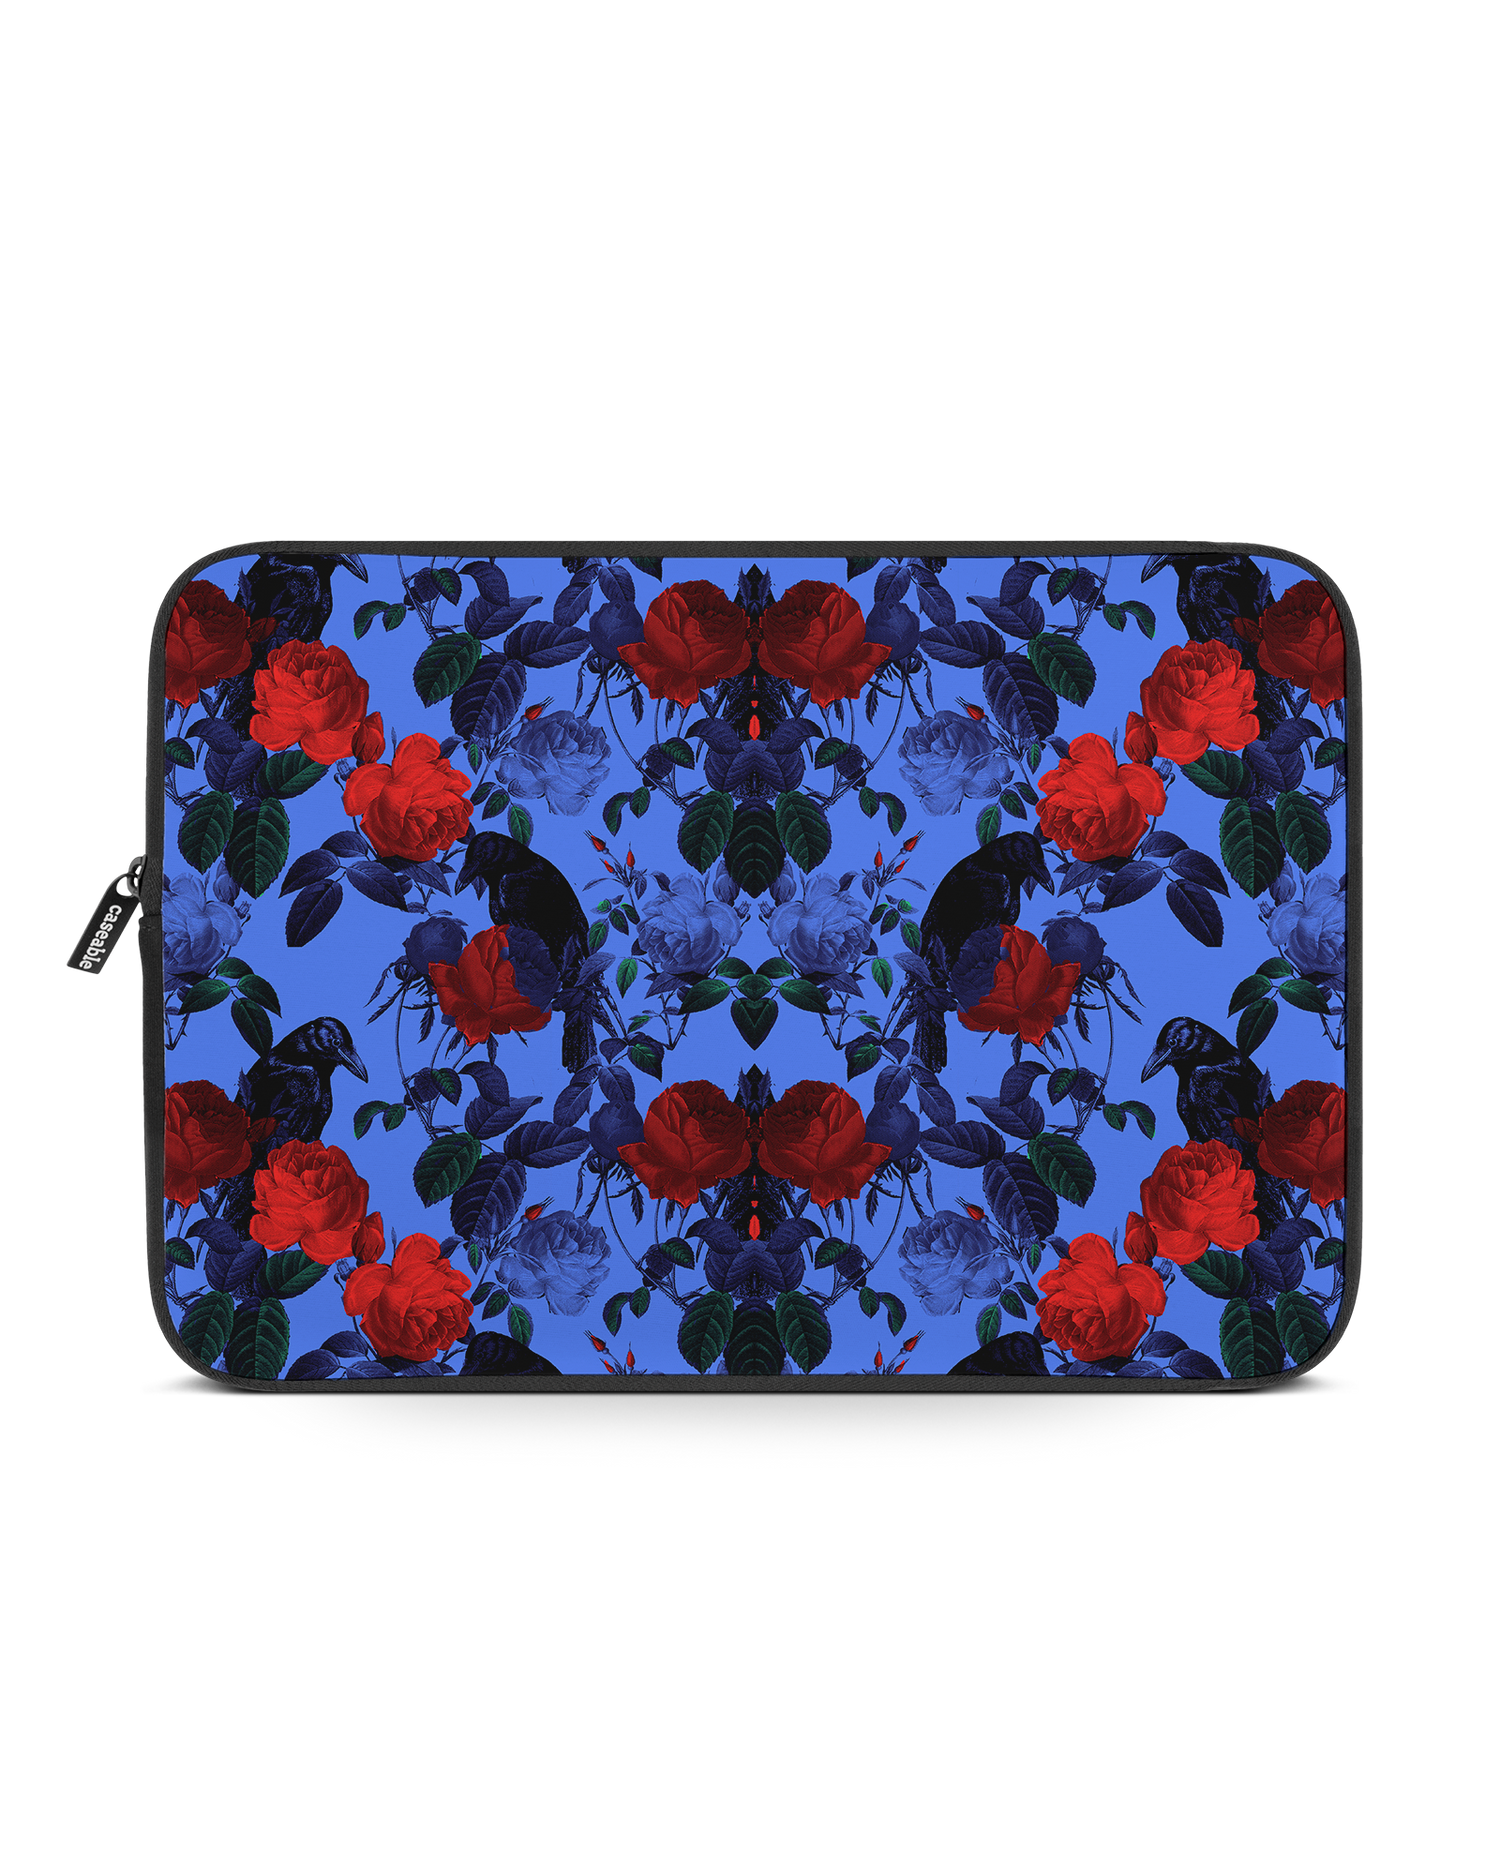 Roses And Ravens Laptop Case 15-16 inch: Front View